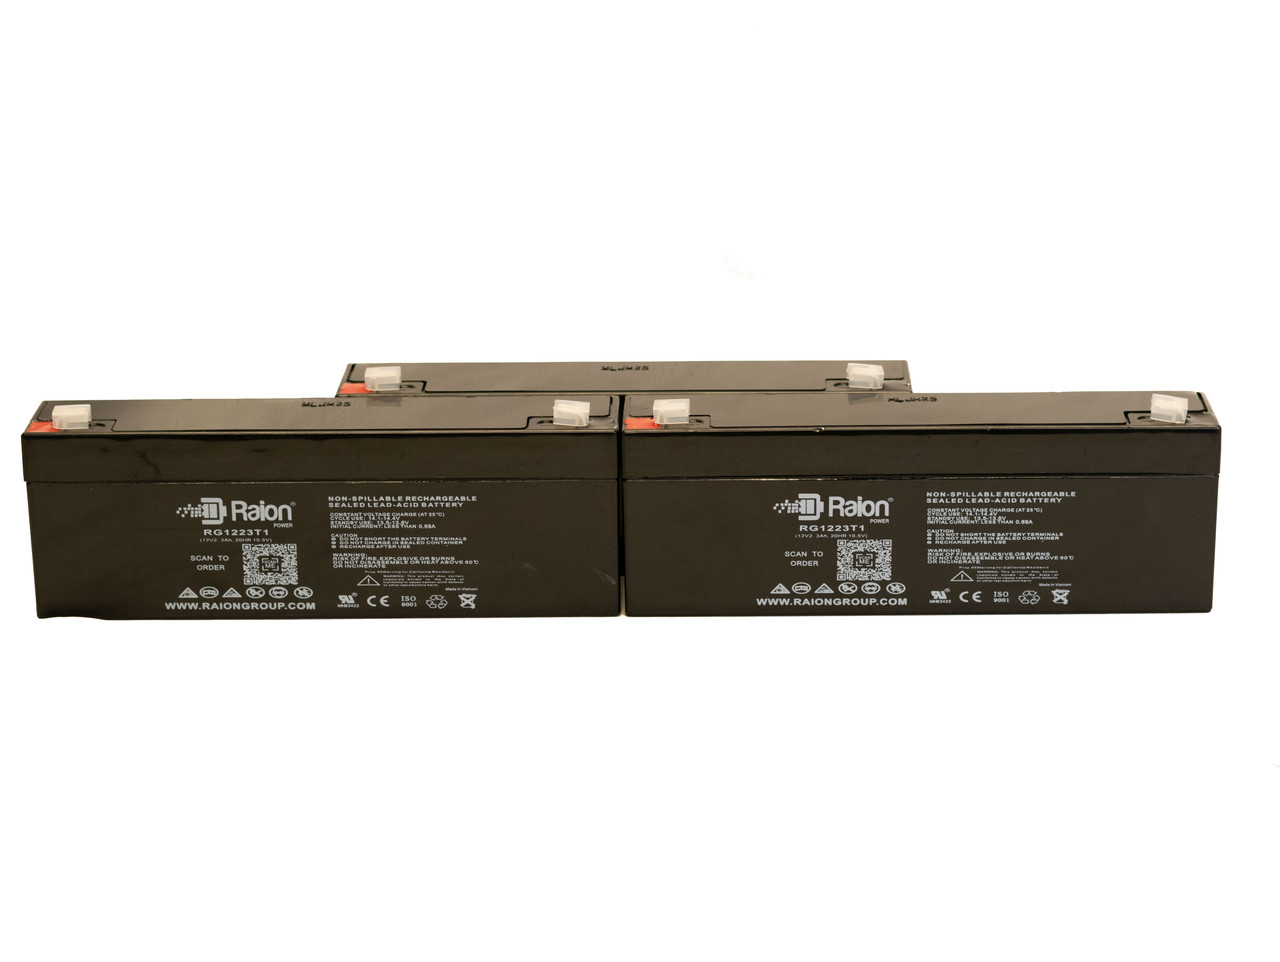 Raion Power 12V 2.3Ah RG1223T1 Replacement Medical Battery for Johnson Controls JC1222 - 3 Pack